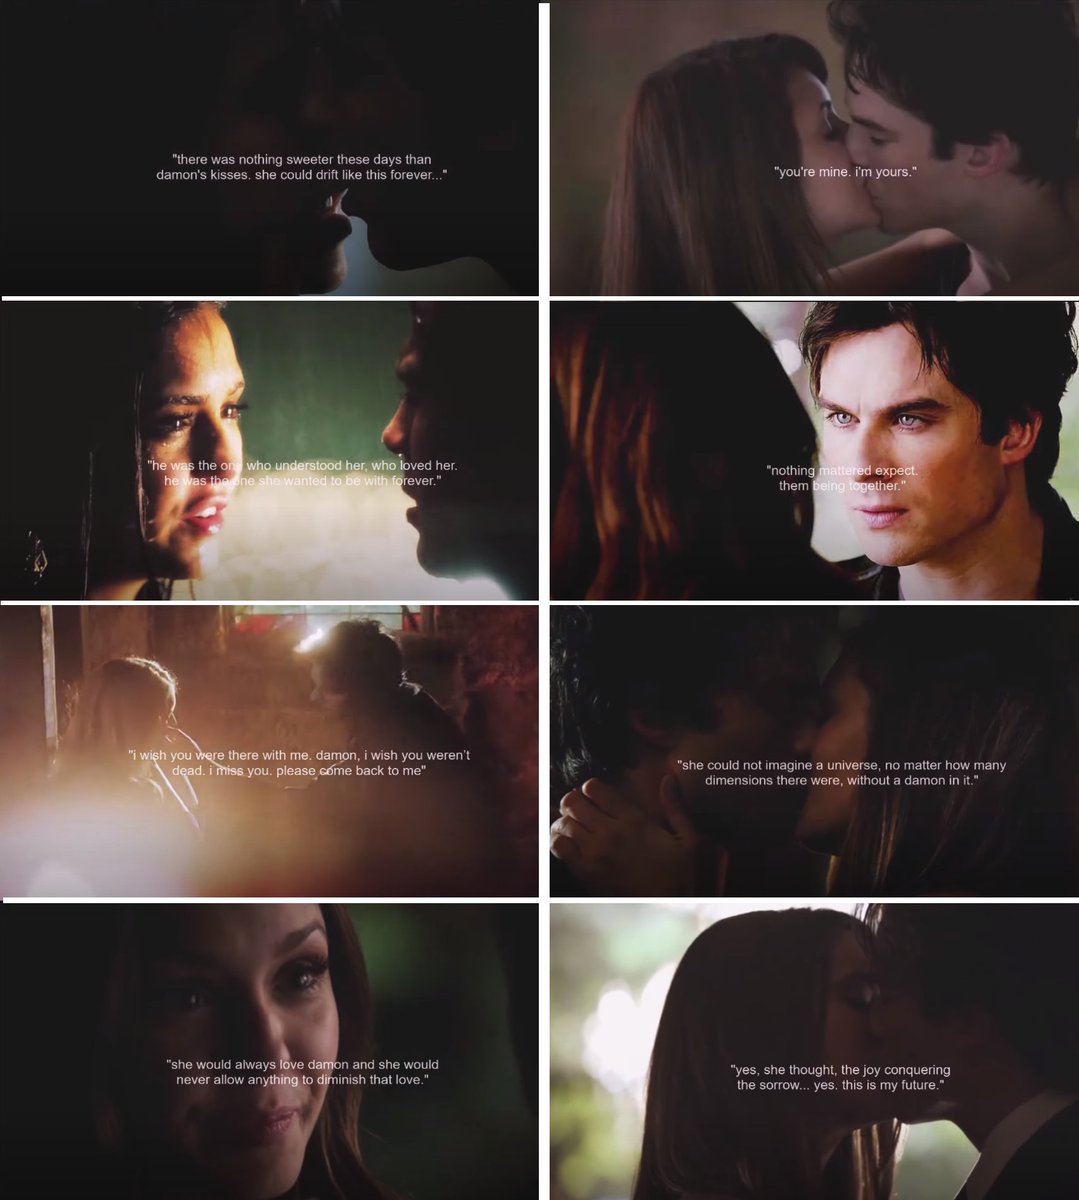 Damon and Elena are endgame in The vampire diaries books by L.J. Smith